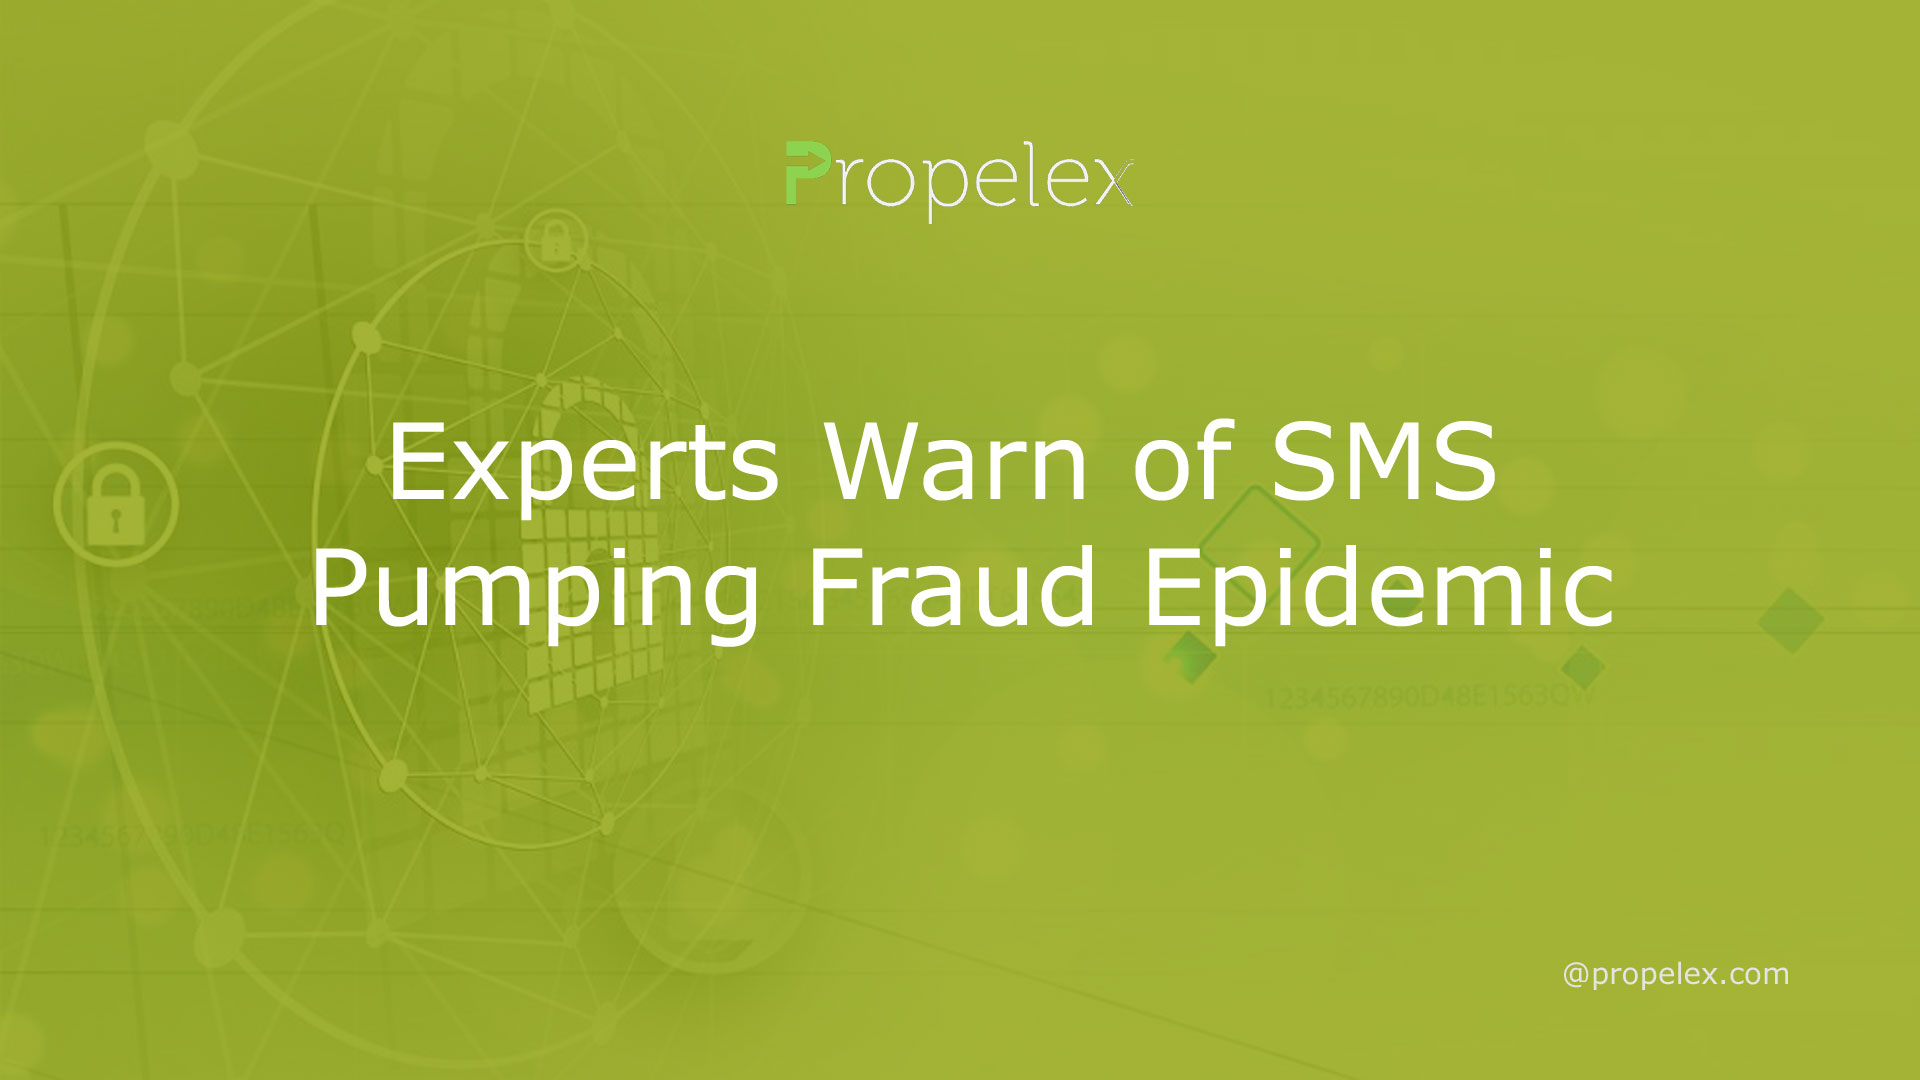 Experts Warn of SMS Pumping Fraud Epidemic